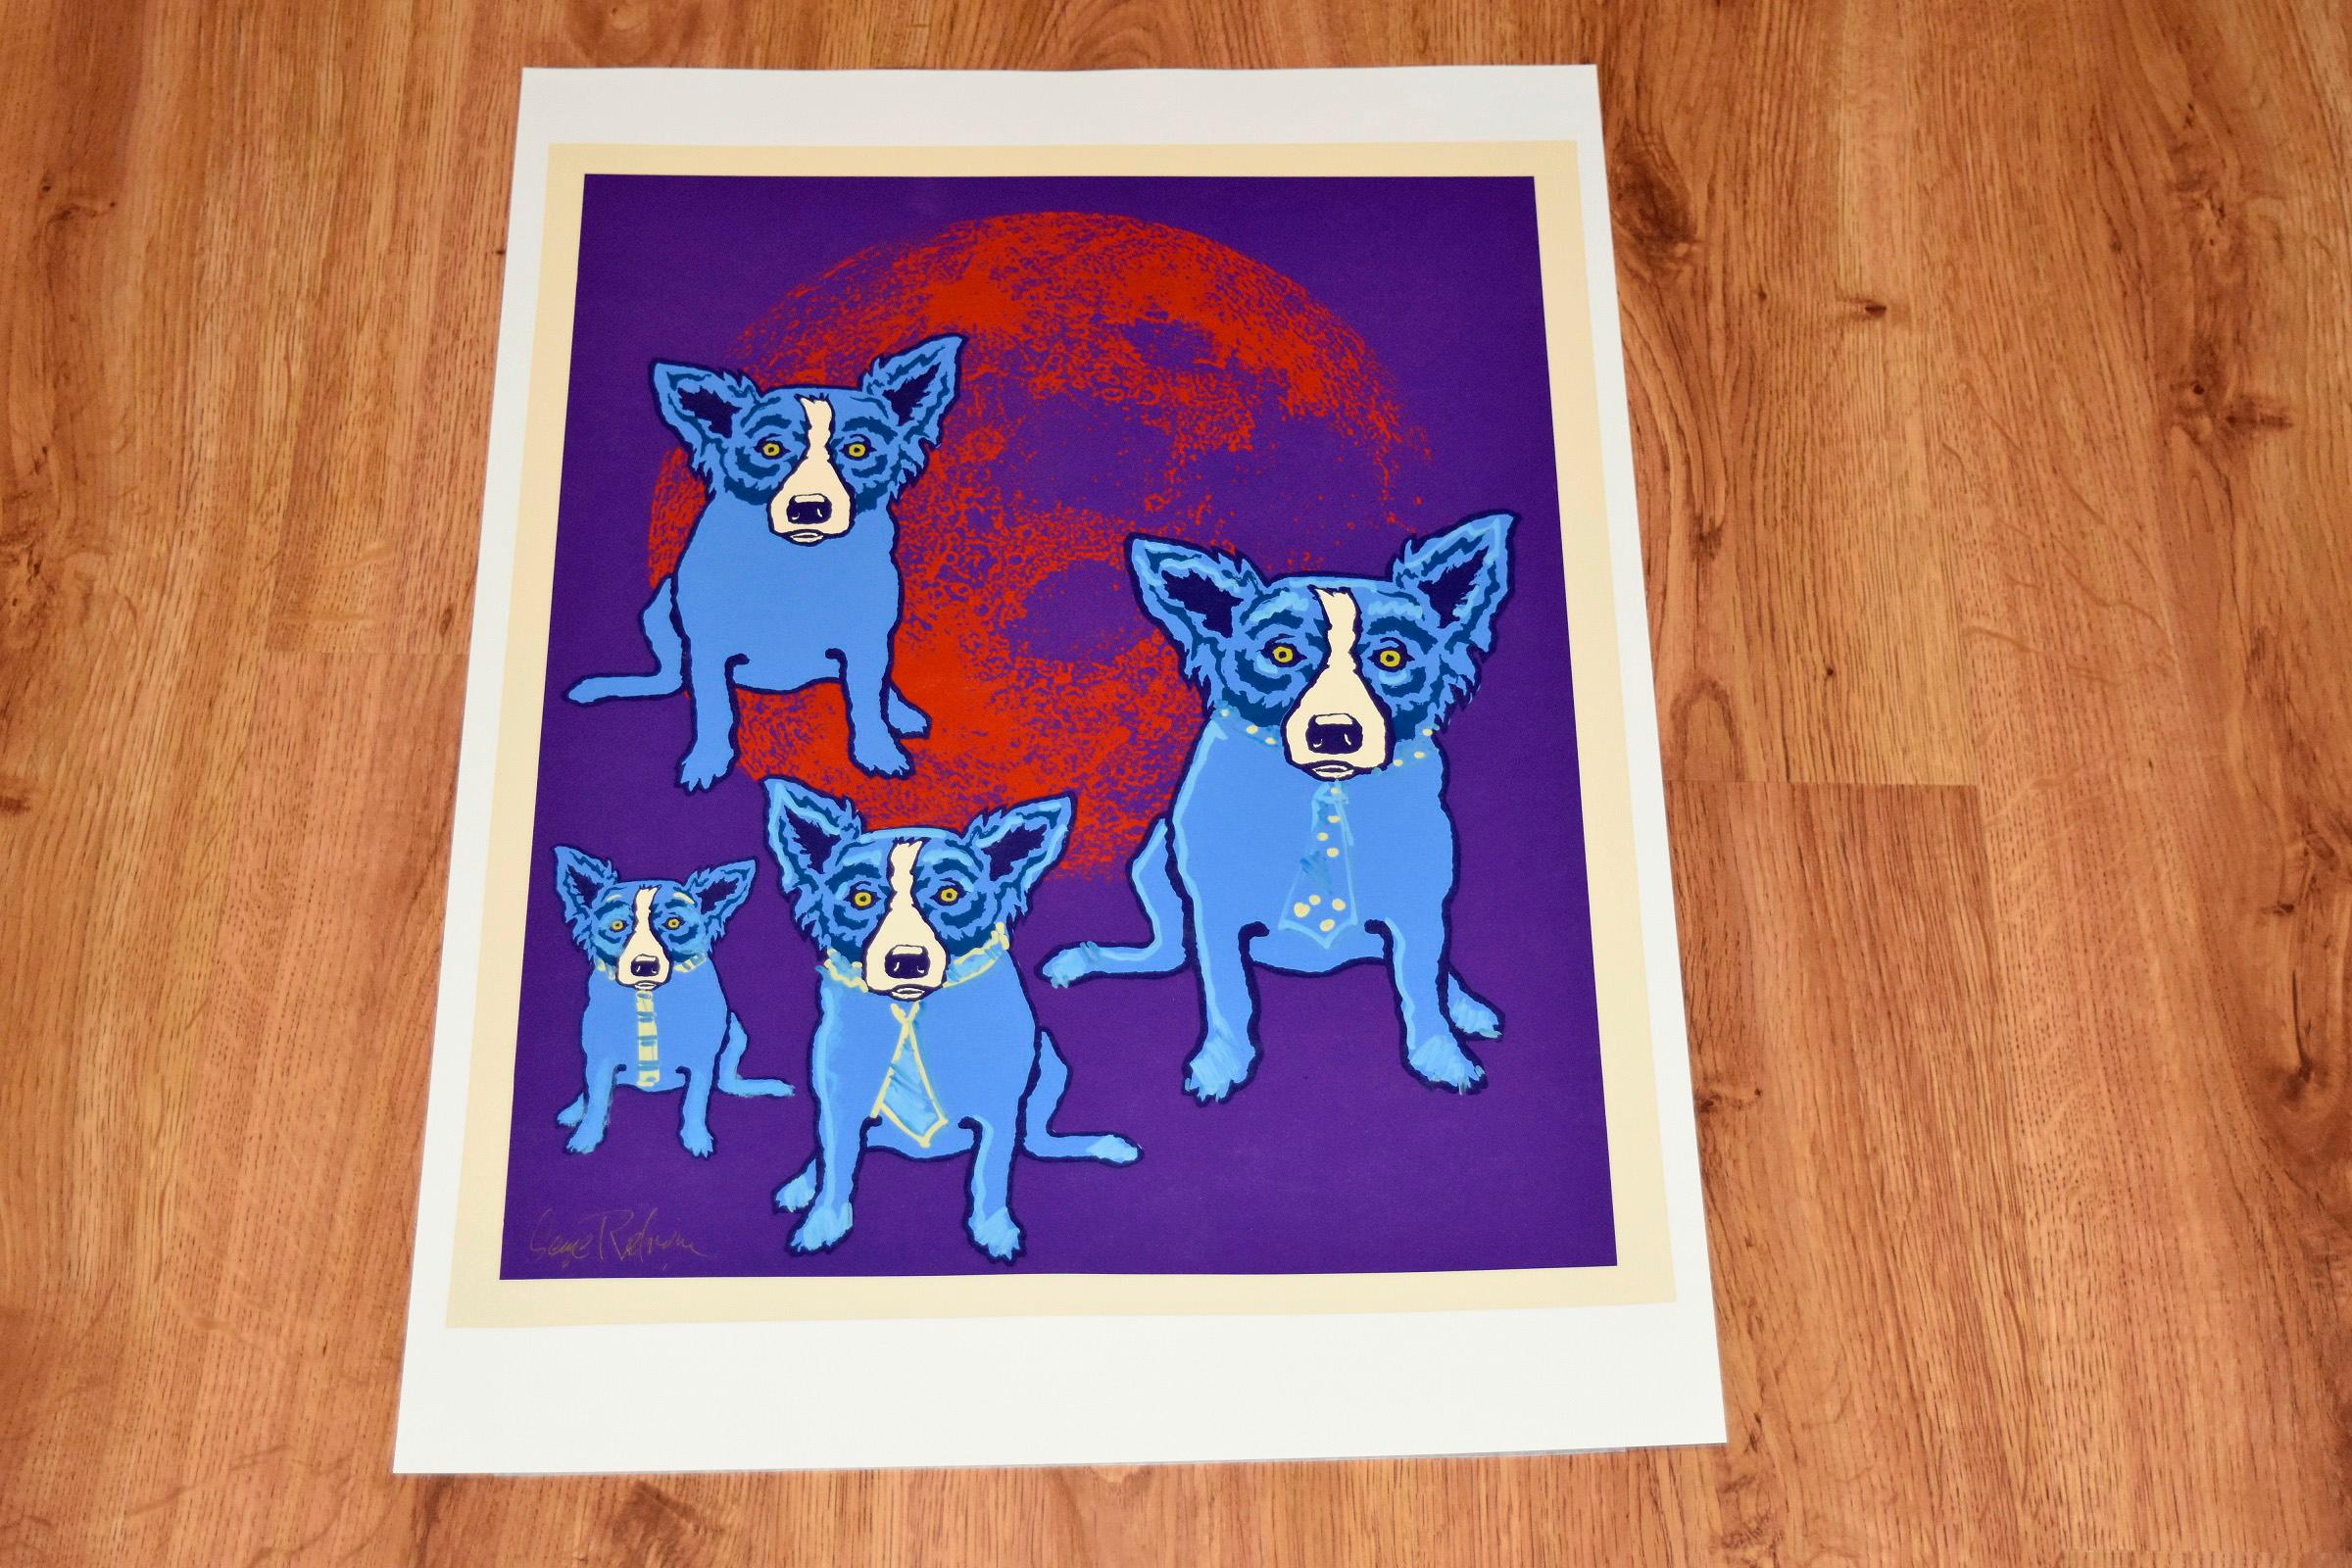 Original Hand-Embellished Red Moon - Unique Blue Dog - Print by George Rodrigue